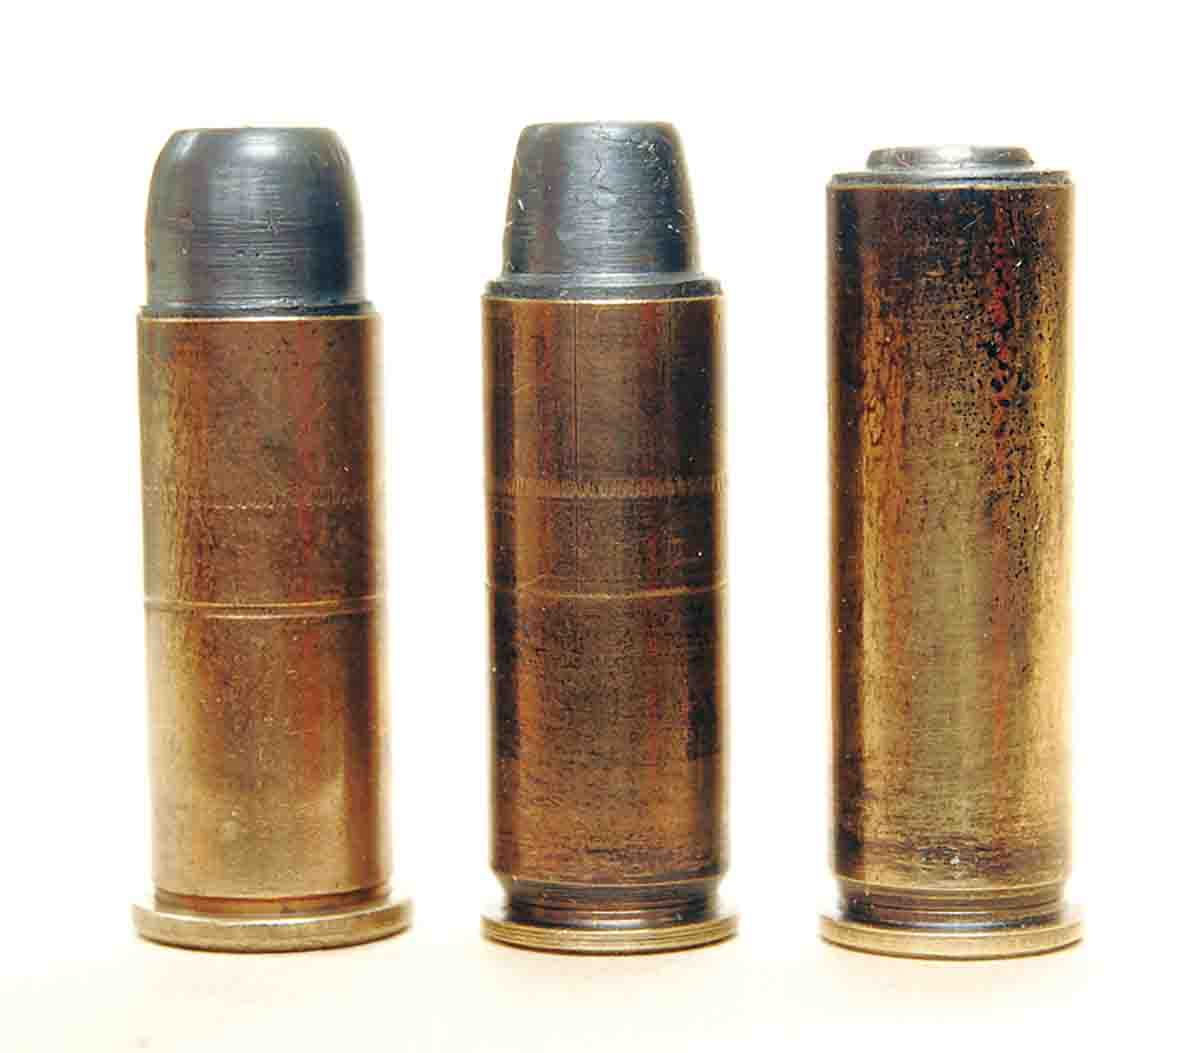 Modified .38 Special rounds, possibly from the U.S. Army Marksmanship Unit experiments. Left to right: a shortened rimmed case, a shortened semi-rimmed case and a full-length semi-rimmed case known as the .38 AMU.